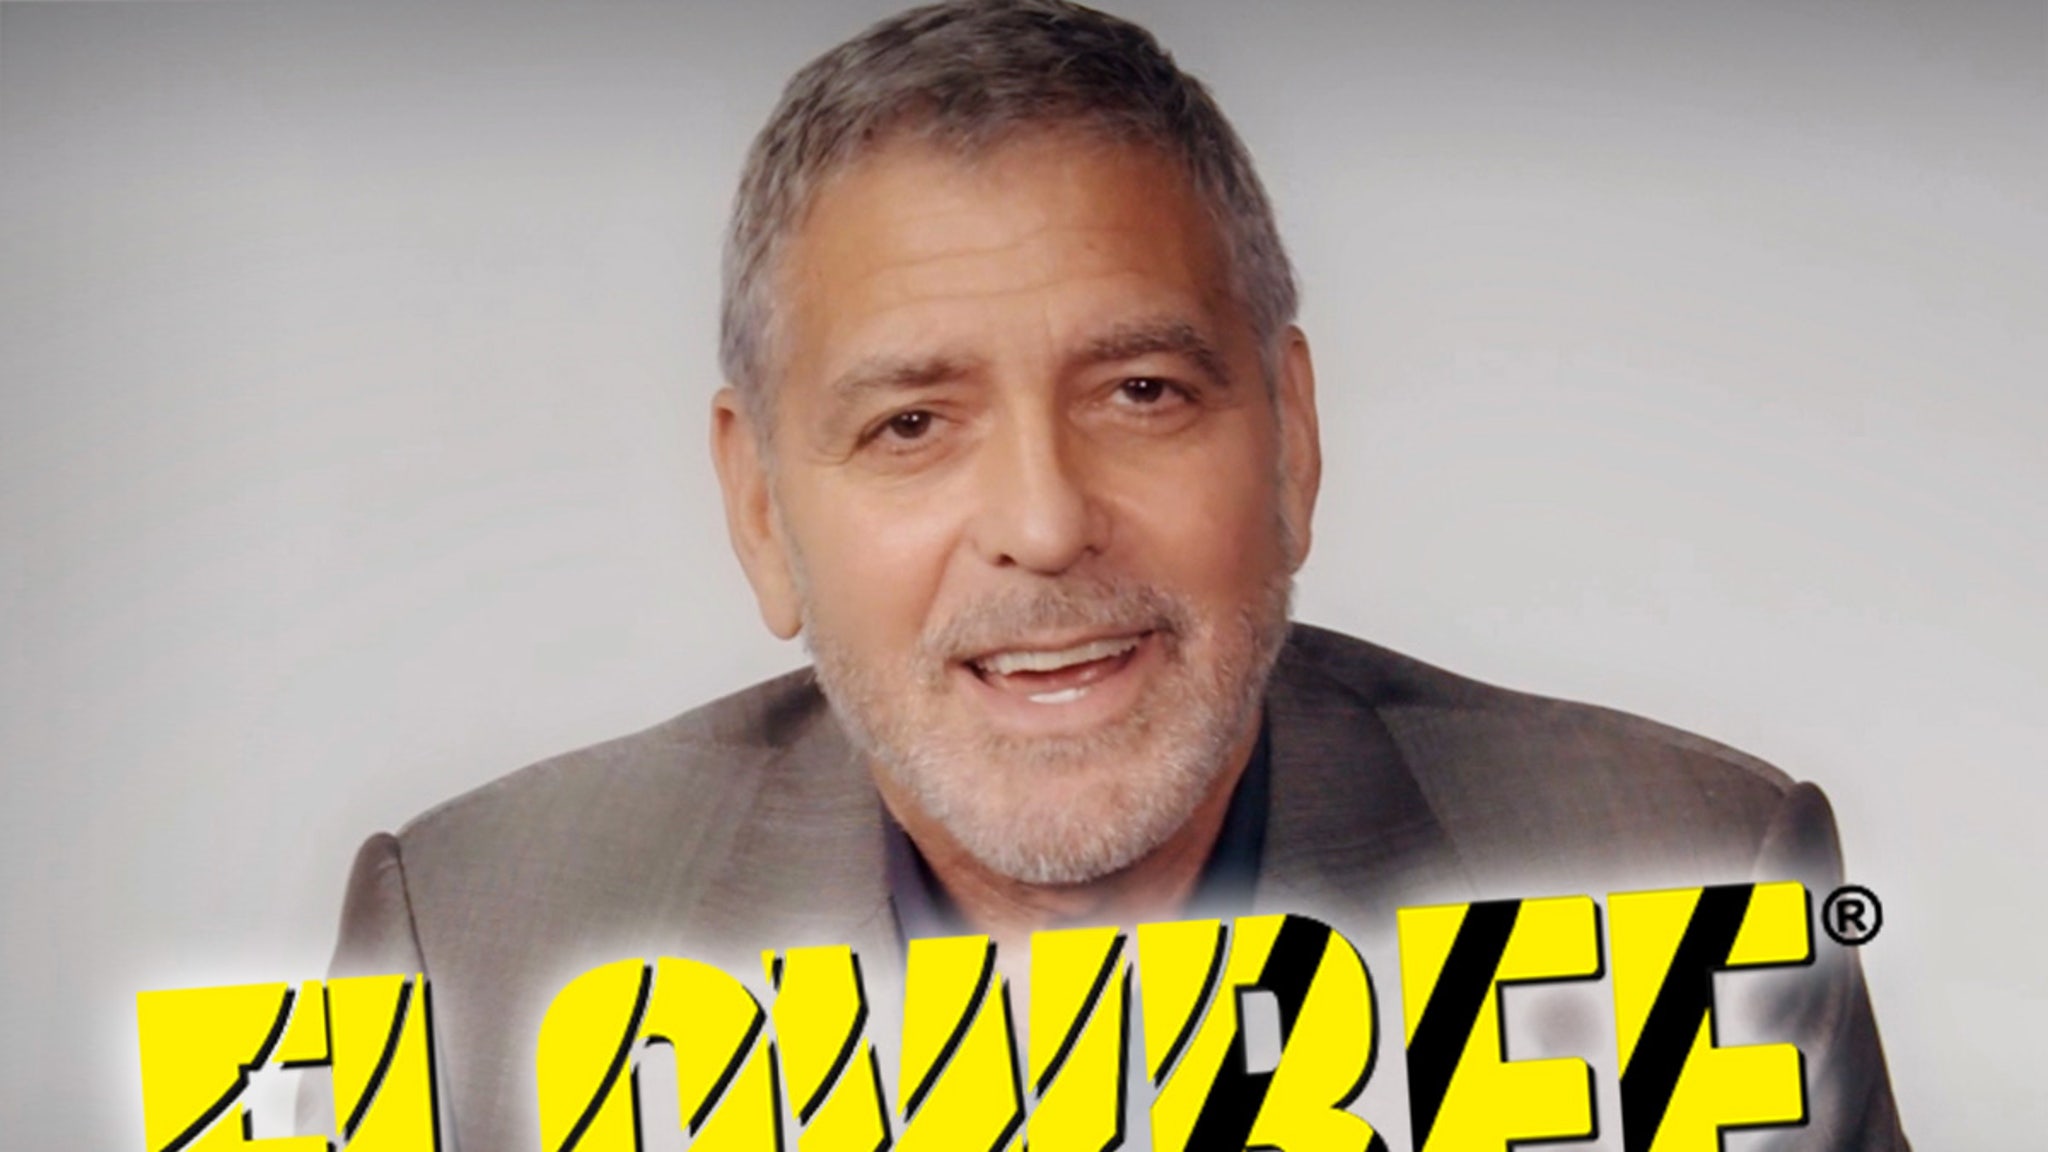 Flowbees Completely Sold Out After George Clooney Shout-Out